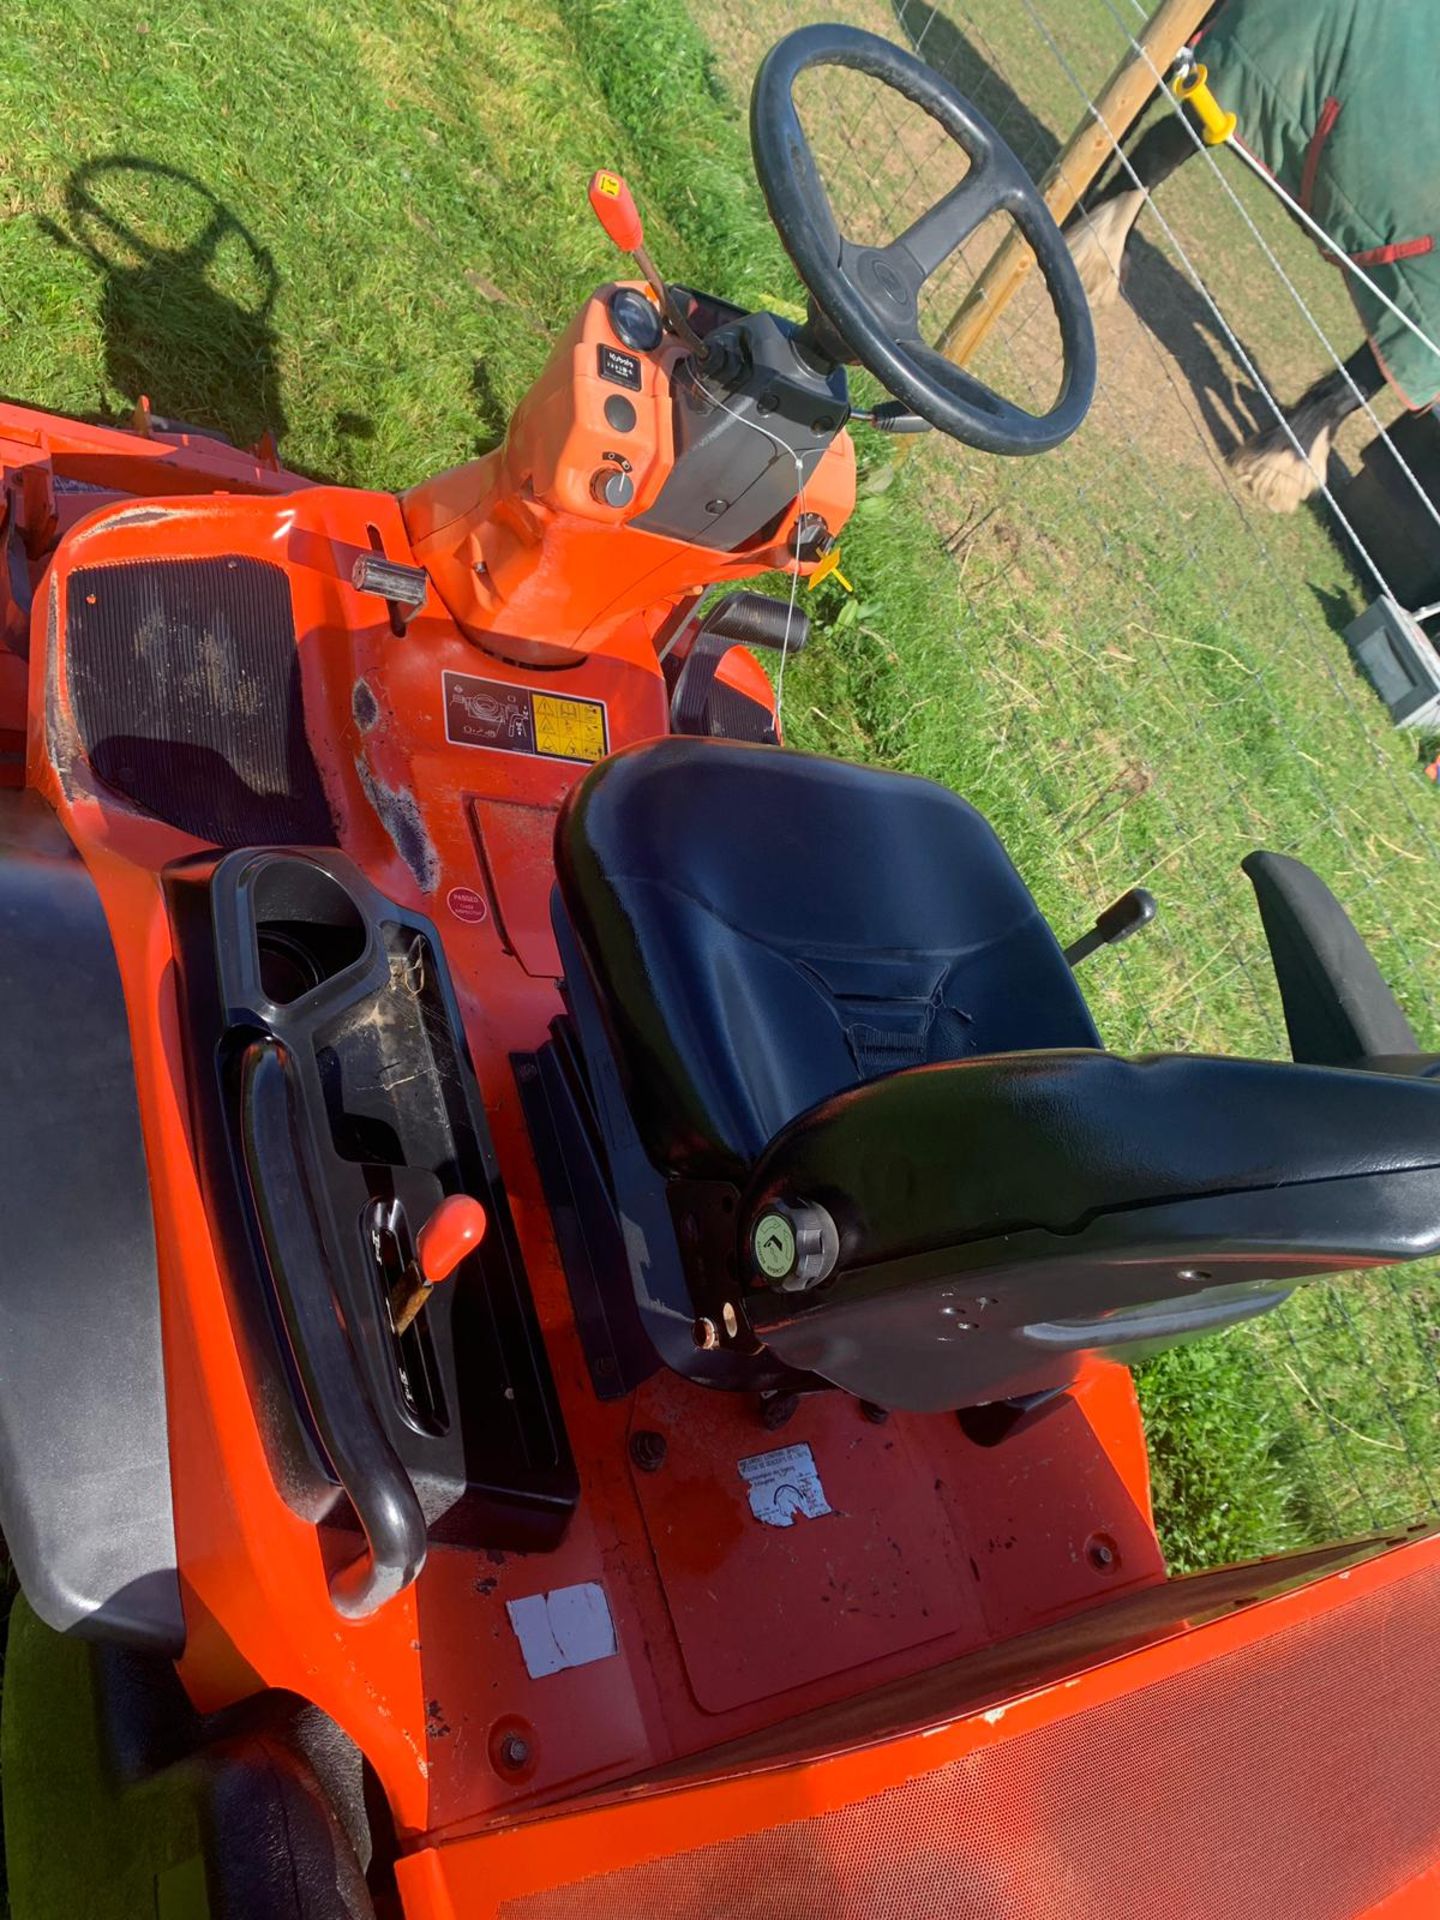 2012 KUBOTA F3680 OUT FRONT 4WD HST MOWER, TURF TYRES, 35 HP DIESEL ENGINE *PLUS VAT* - Image 11 of 15